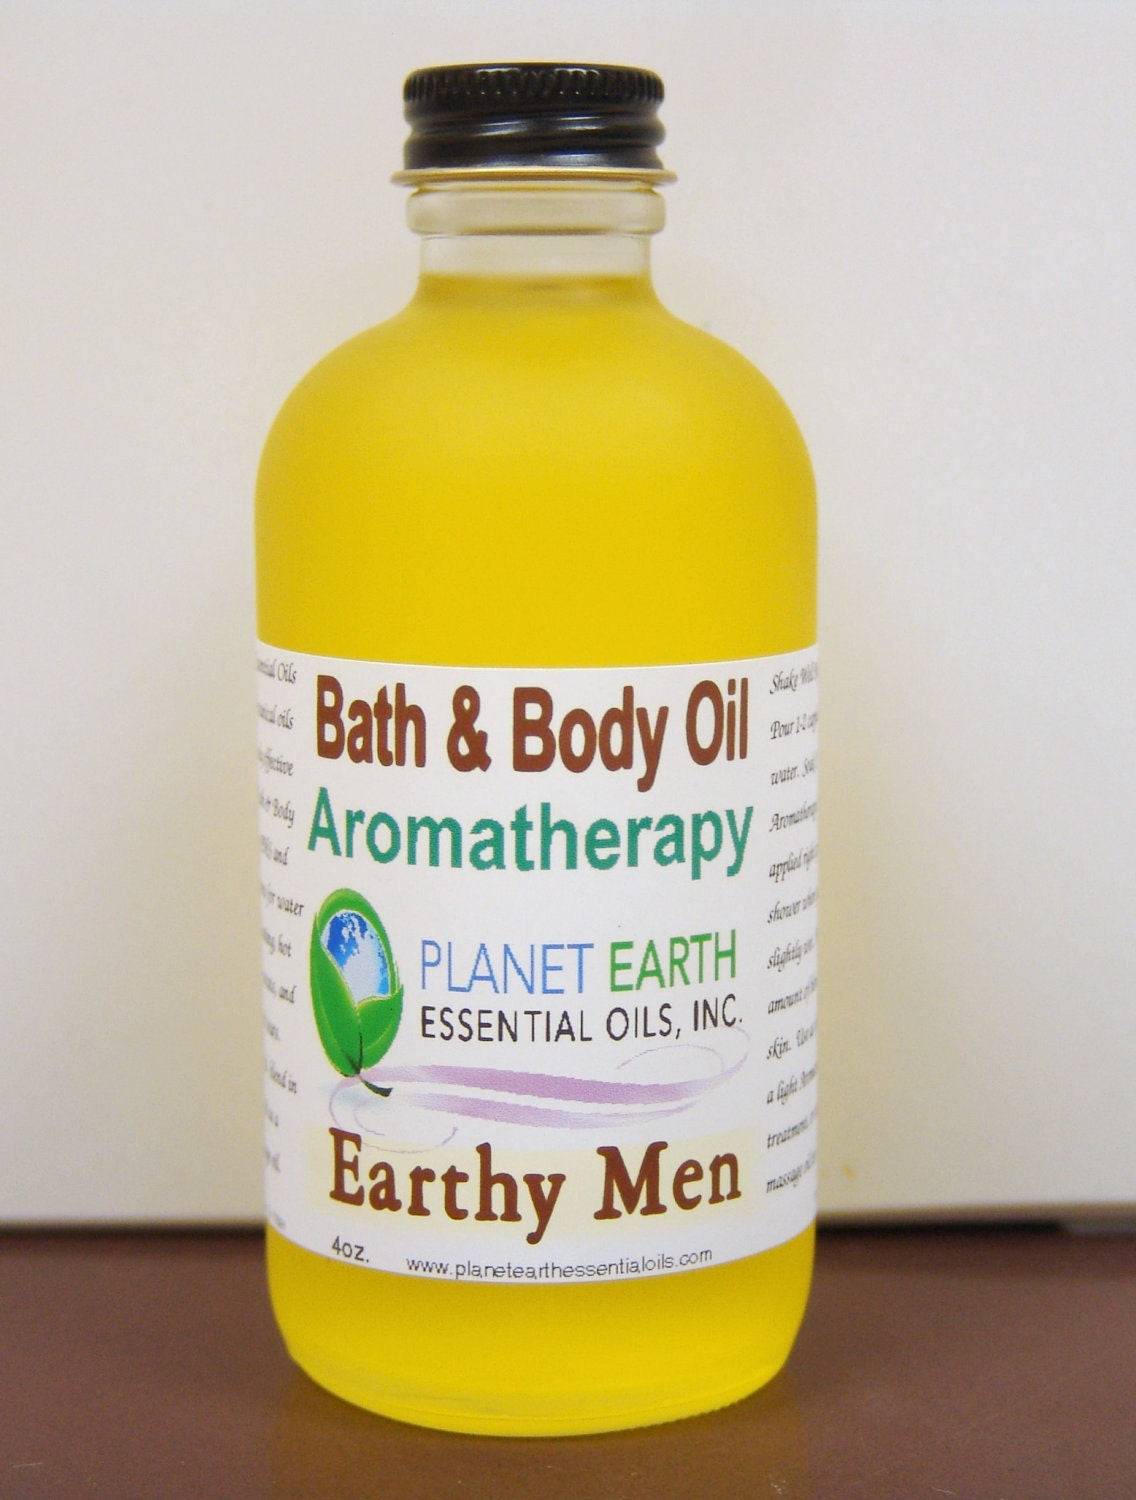 Earthy Men Aromatherapy Bath And Body Oil Holistic Healing